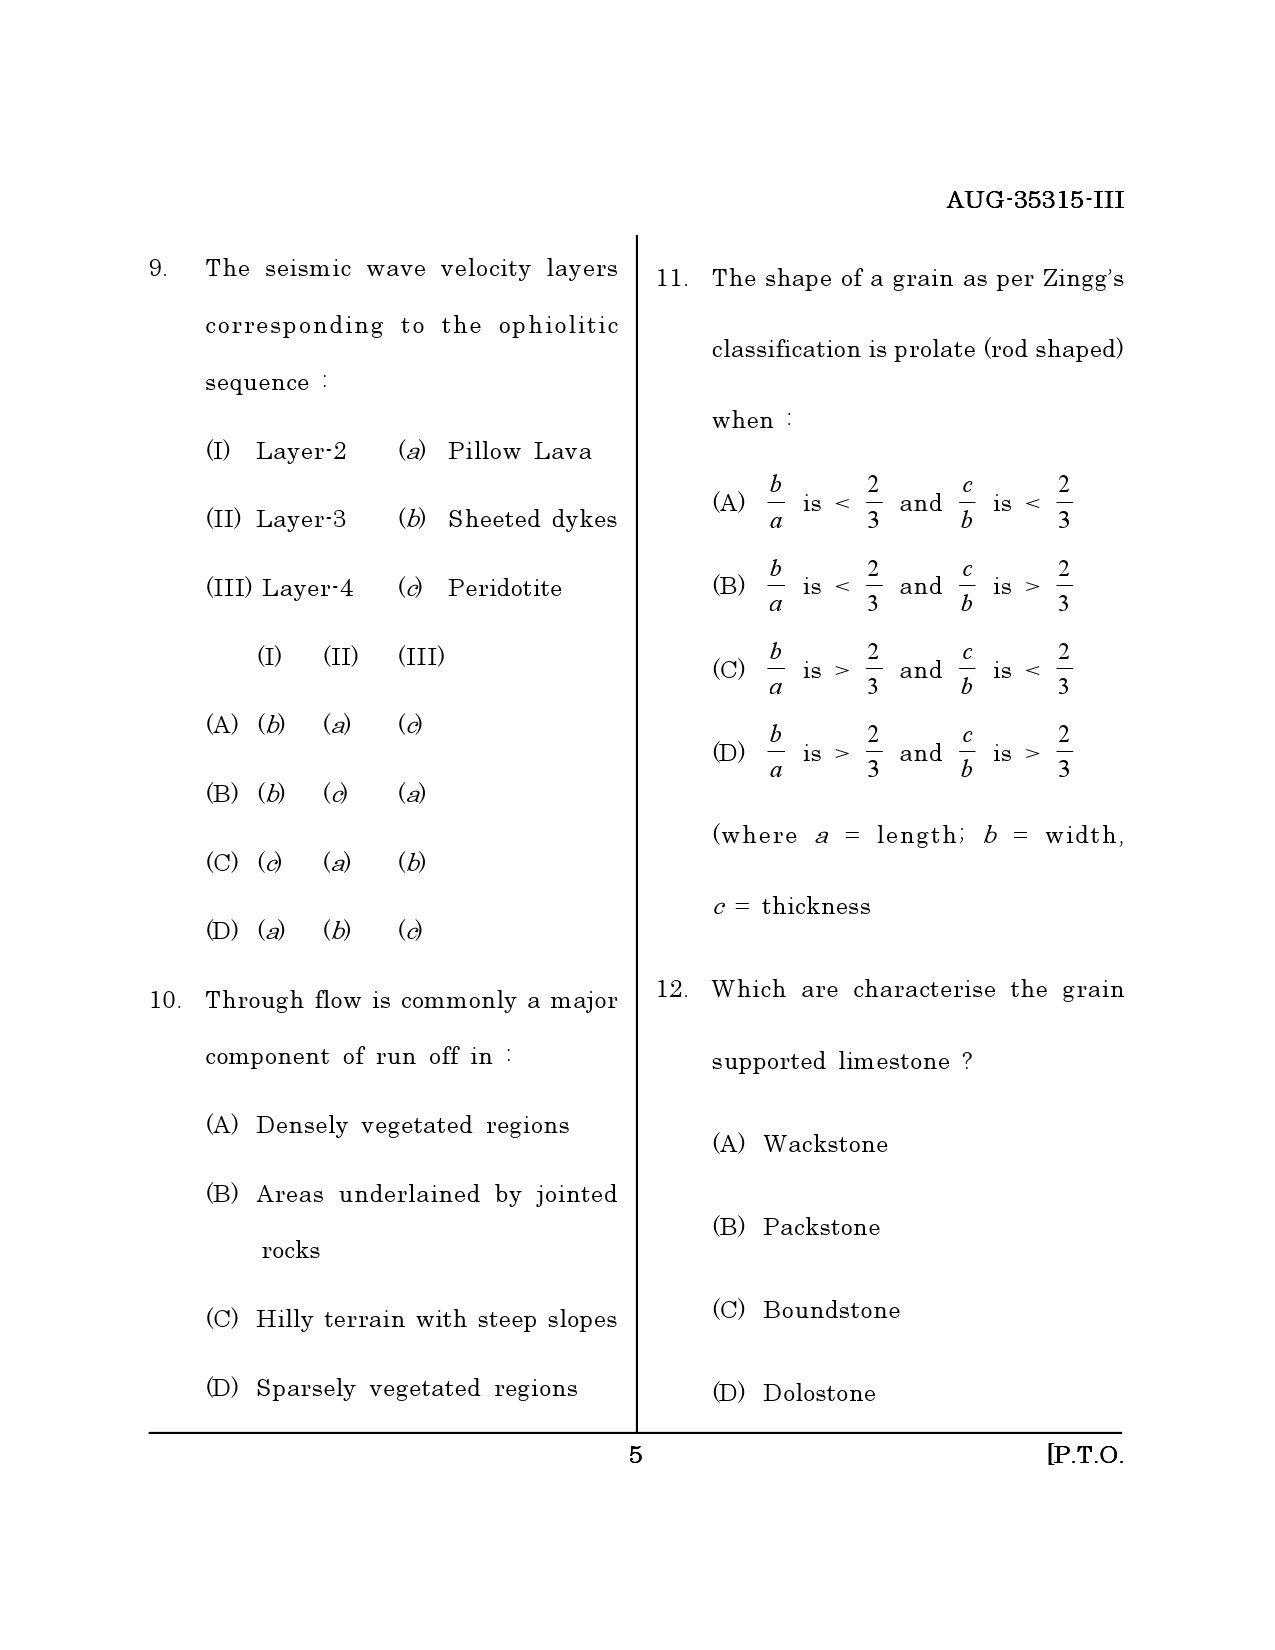 Maharashtra SET Earth Atmospheric Ocean Planetary Science Question Paper III August 2015 4